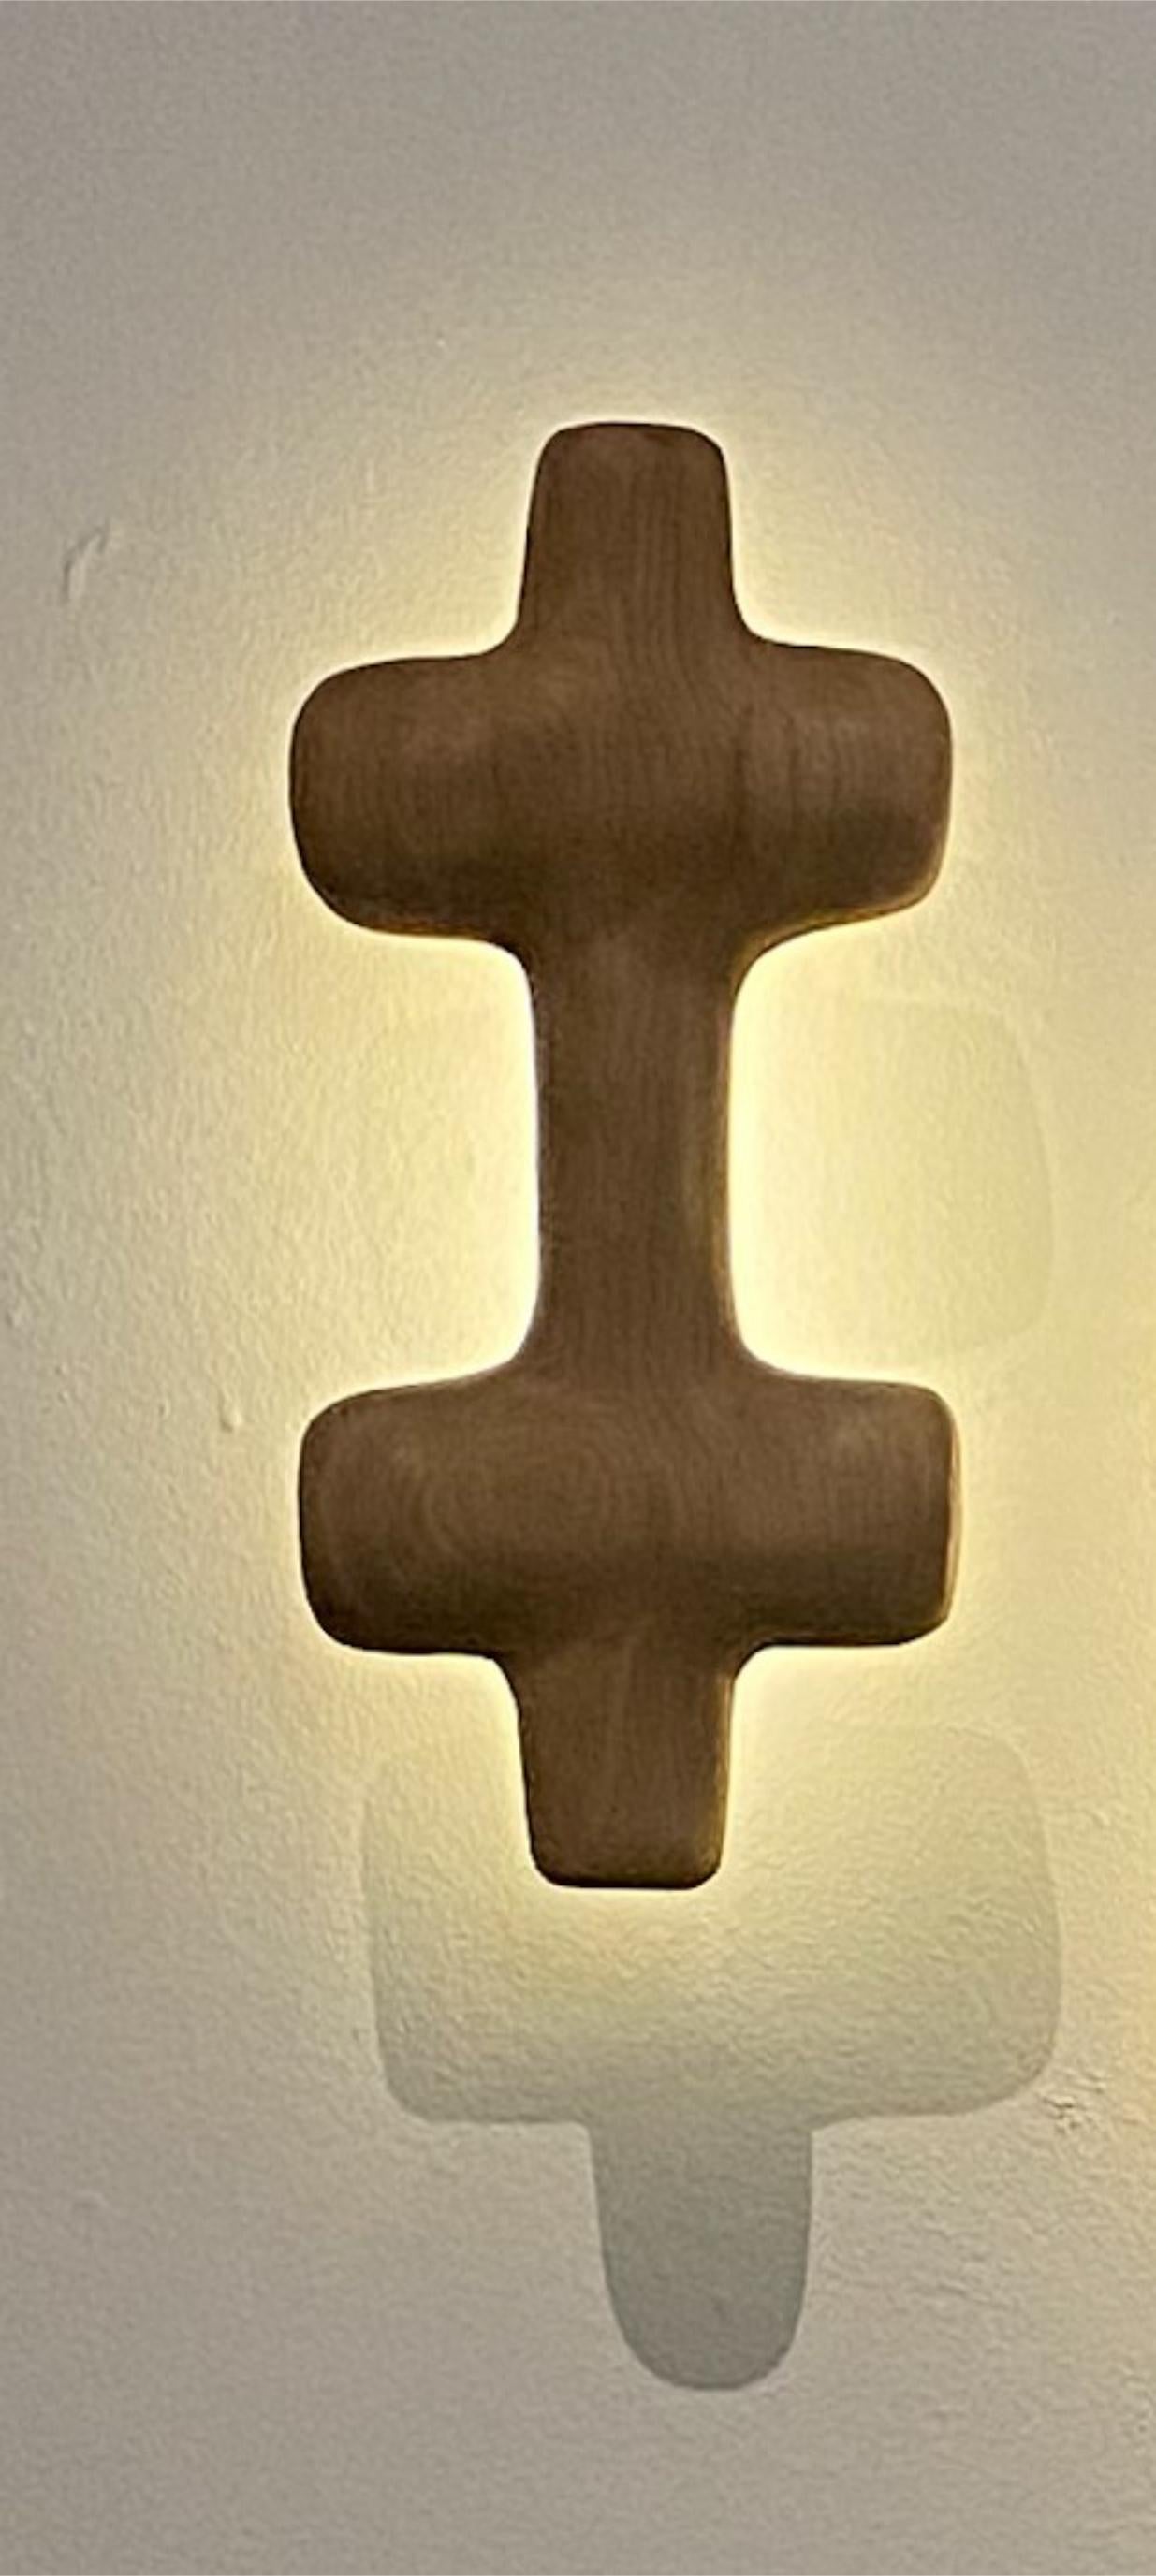 Olio Wall Sconce by Nish Studio
Dimensions: W 19 x D 4 x H 37 cm
Materials: Solid Oak


N I S H is a Cape Town based Fashion and Furniture design studio. N I S H creates contemporary, elegant and progressive designs that salute the contradiction